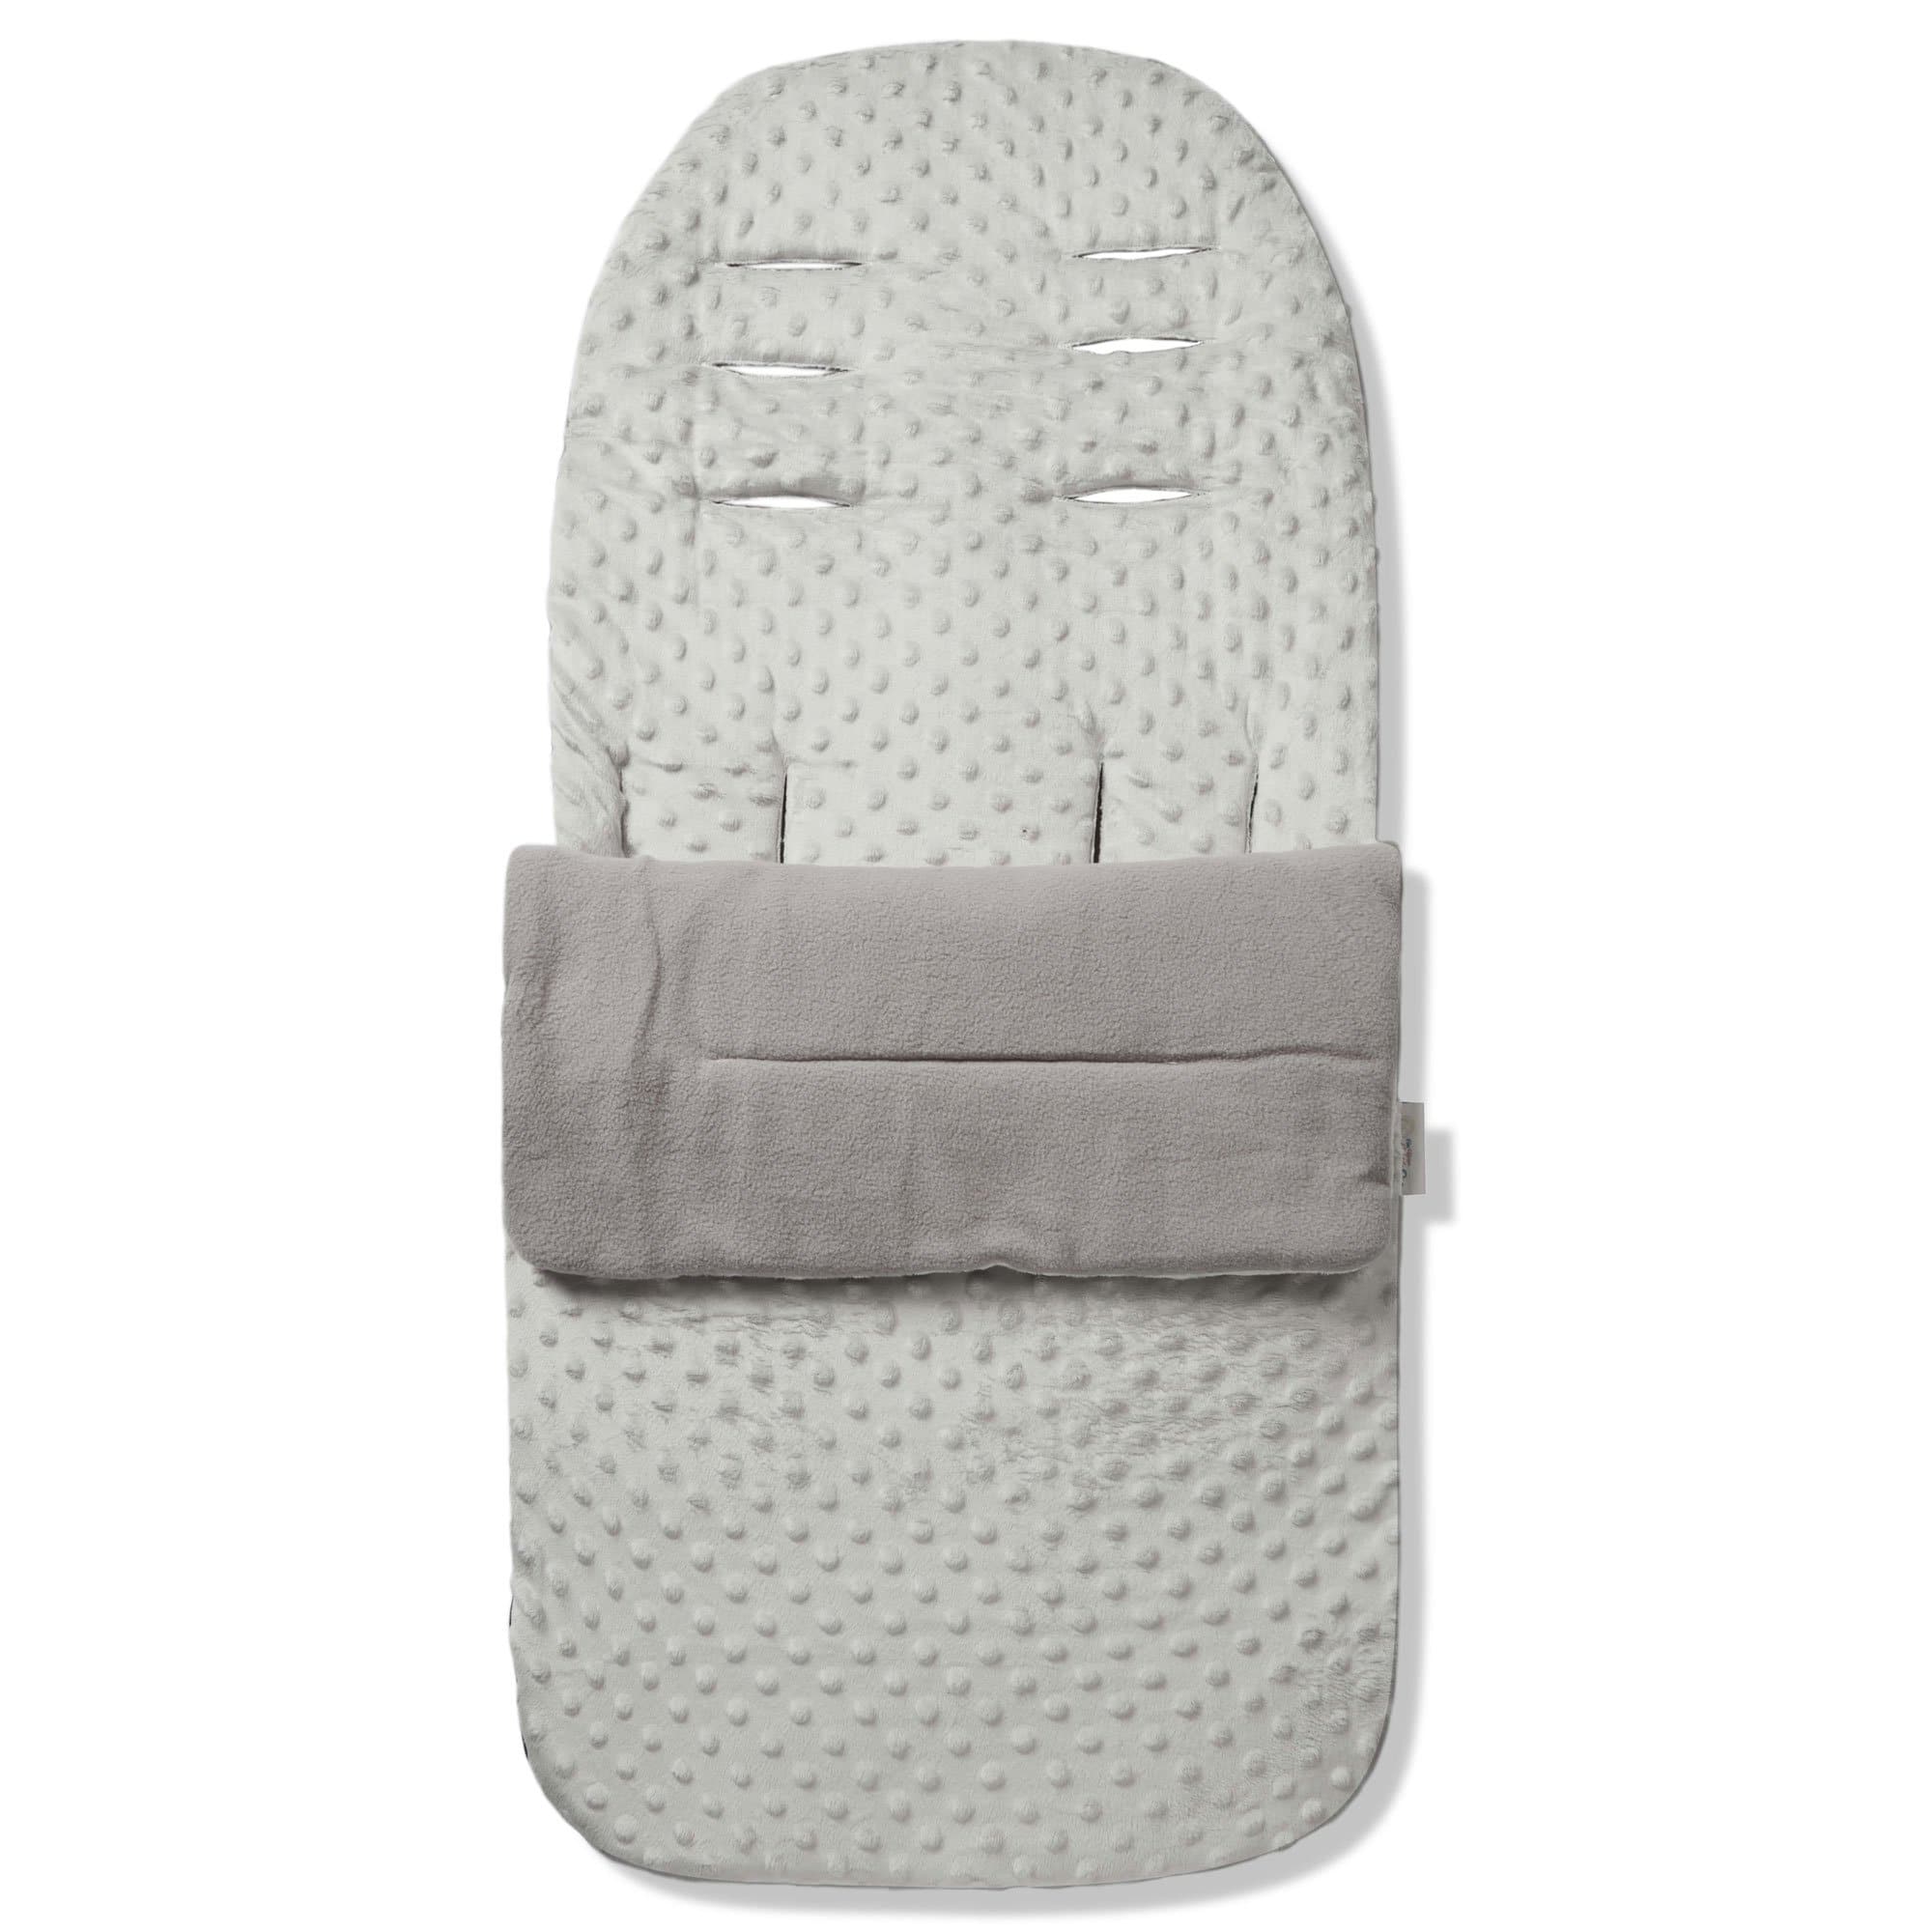 Dimple Footmuff / Cosy Toes Compatible with Babywelt - Grey / Fits All Models | For Your Little One